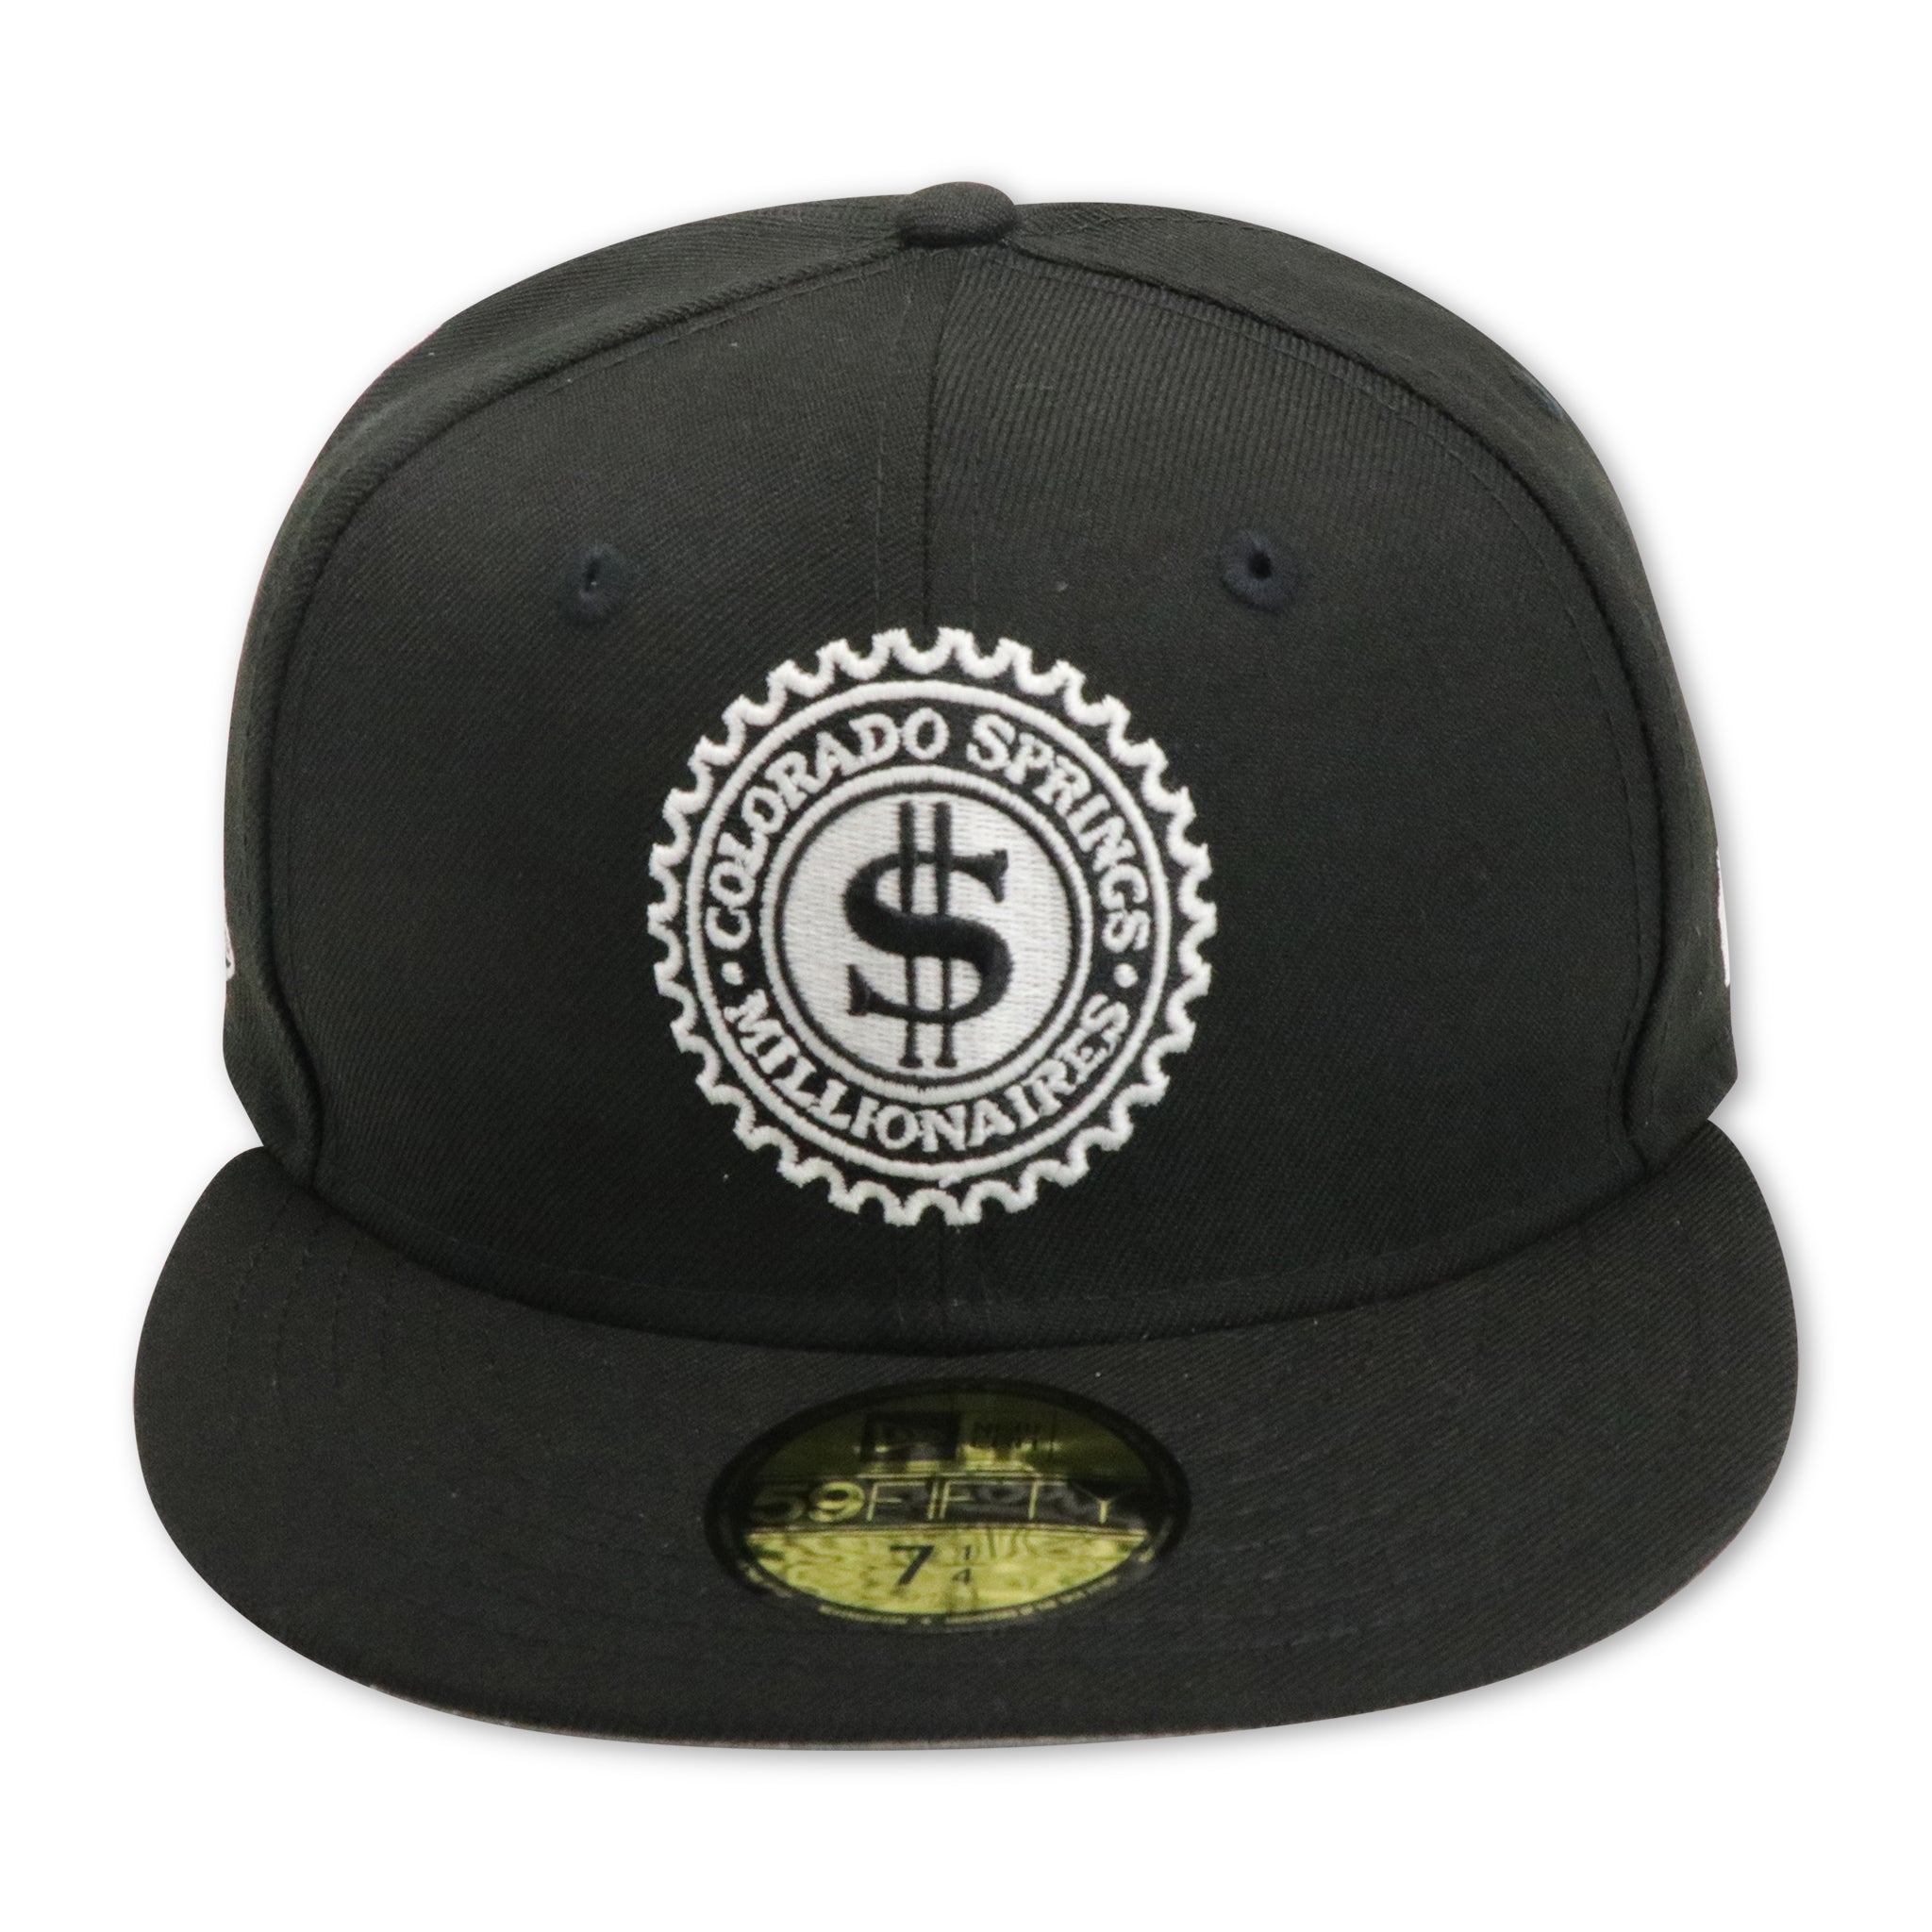 COLORADO SPRINGS MILLIONAIRES (BLACK) NEW ERA 59FIFTY FITTED (GLOW IN THE DARK LOGO)